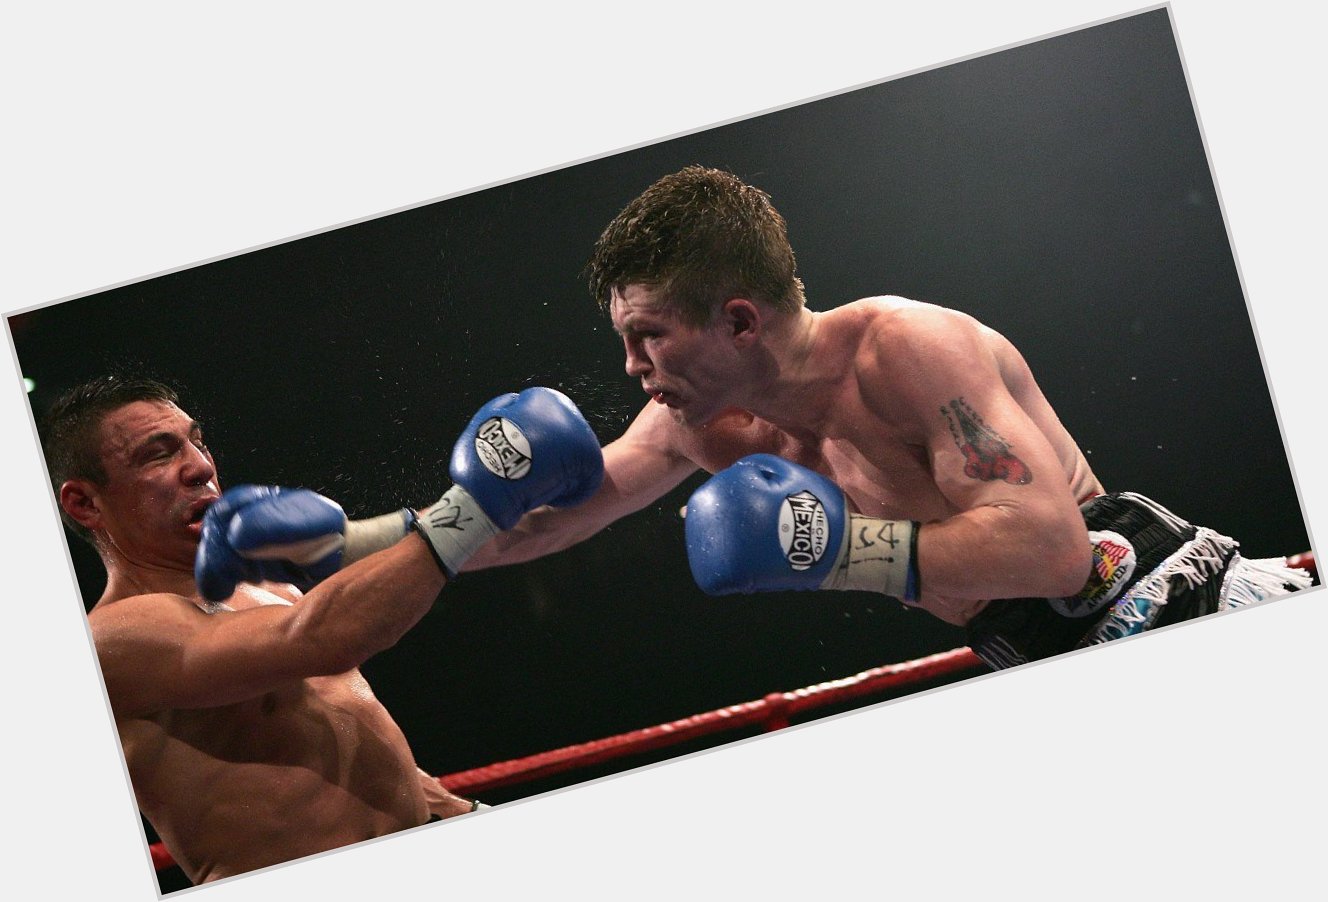 He was responsible for one the greatest fights in British boxing.

Happy birthday, Ricky Hatton. 